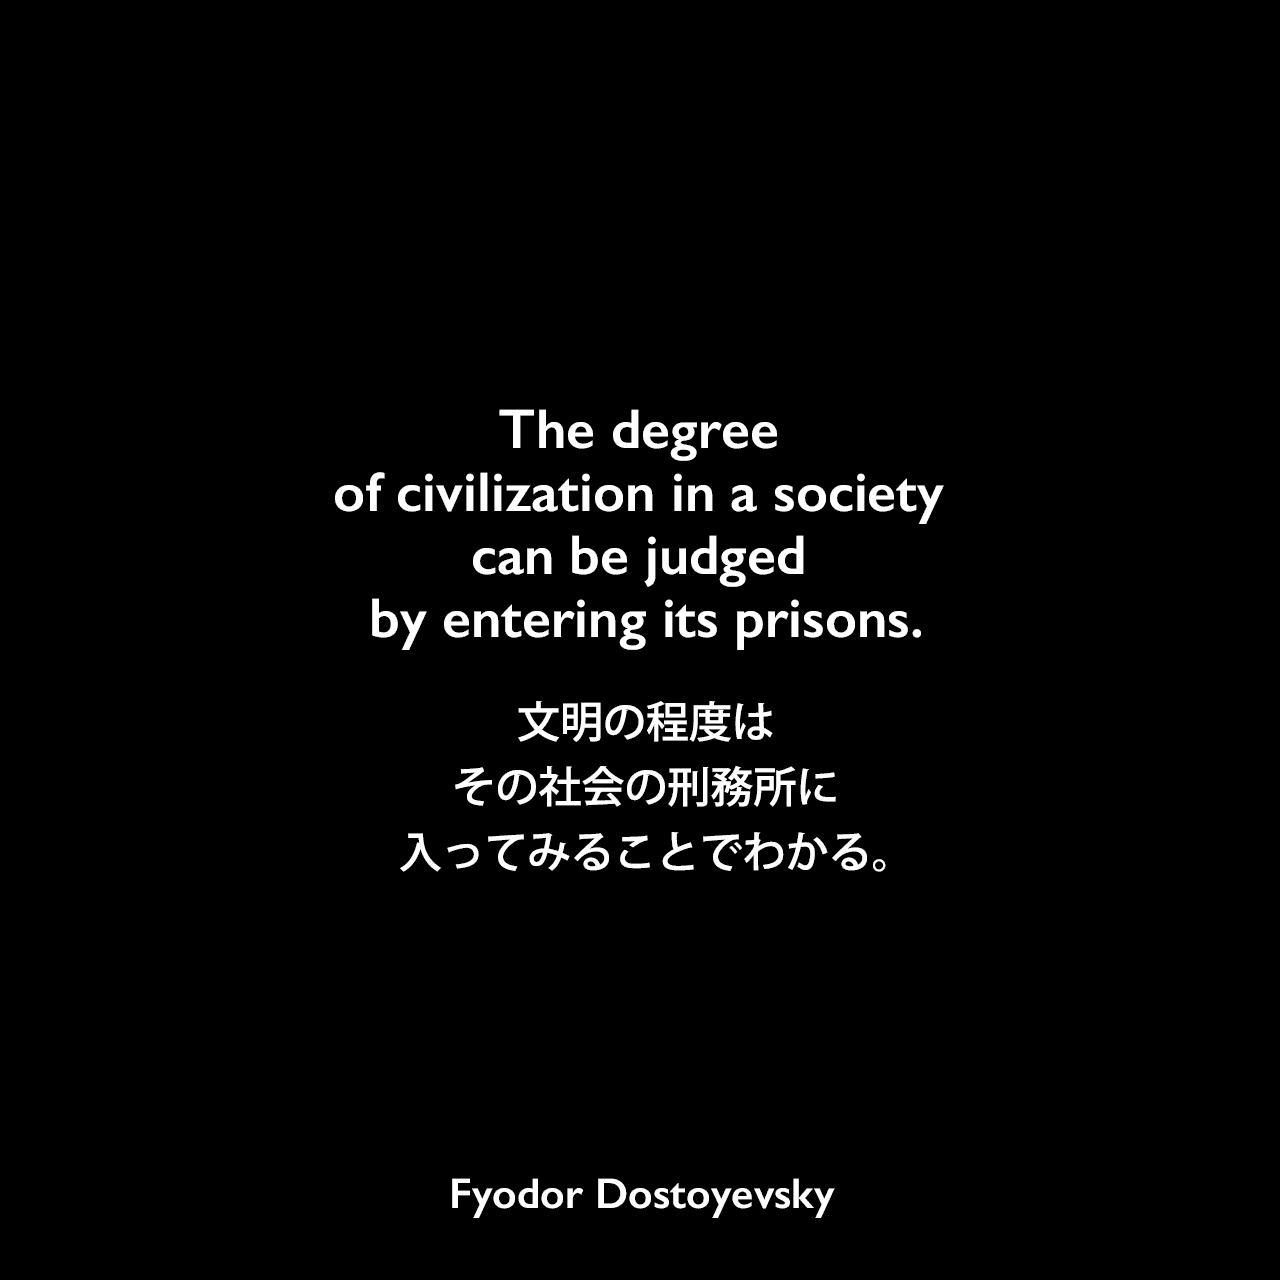 The degree of civilization in a society can be judged by entering its prisons.文明の程度は、その社会の刑務所に入ってみることでわかる。- ドストエフキーの小説「死の家の記録」よりFyodor Dostoyevsky